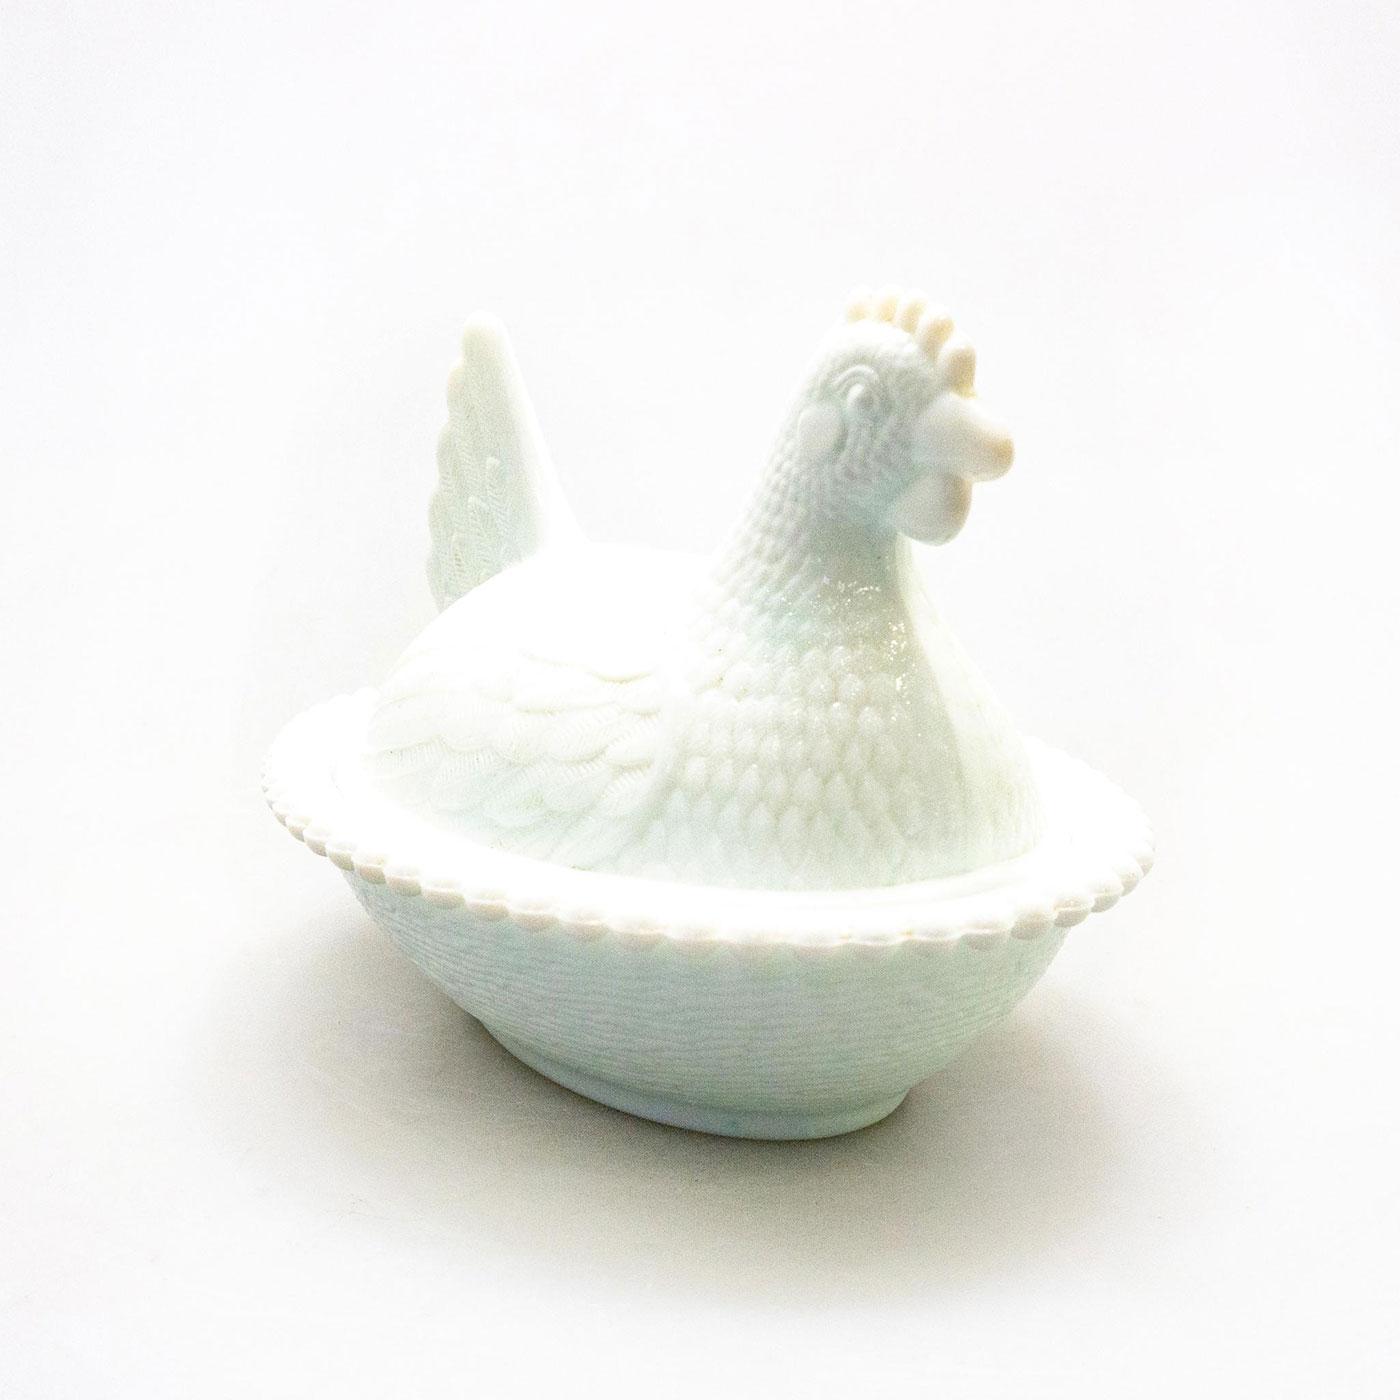 Sold at Auction: 2 Blue and White Milk Glass Hens on Nests Covered Dishes